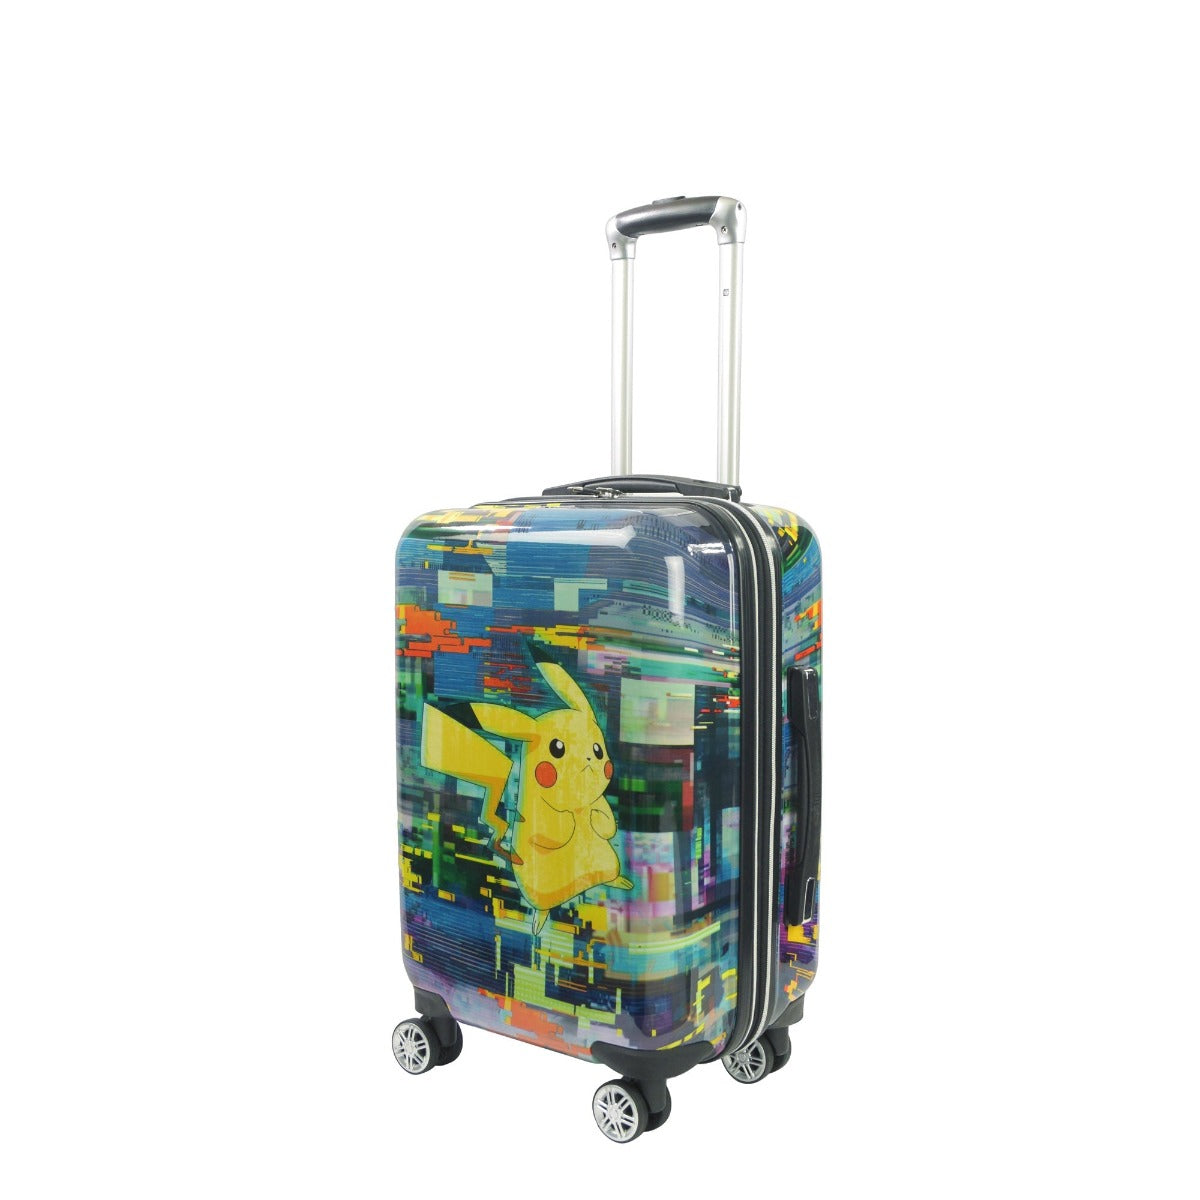 Pokemon Pikachu Luggage 21 inch carry on hard sided Ful spinner wheel suitcase